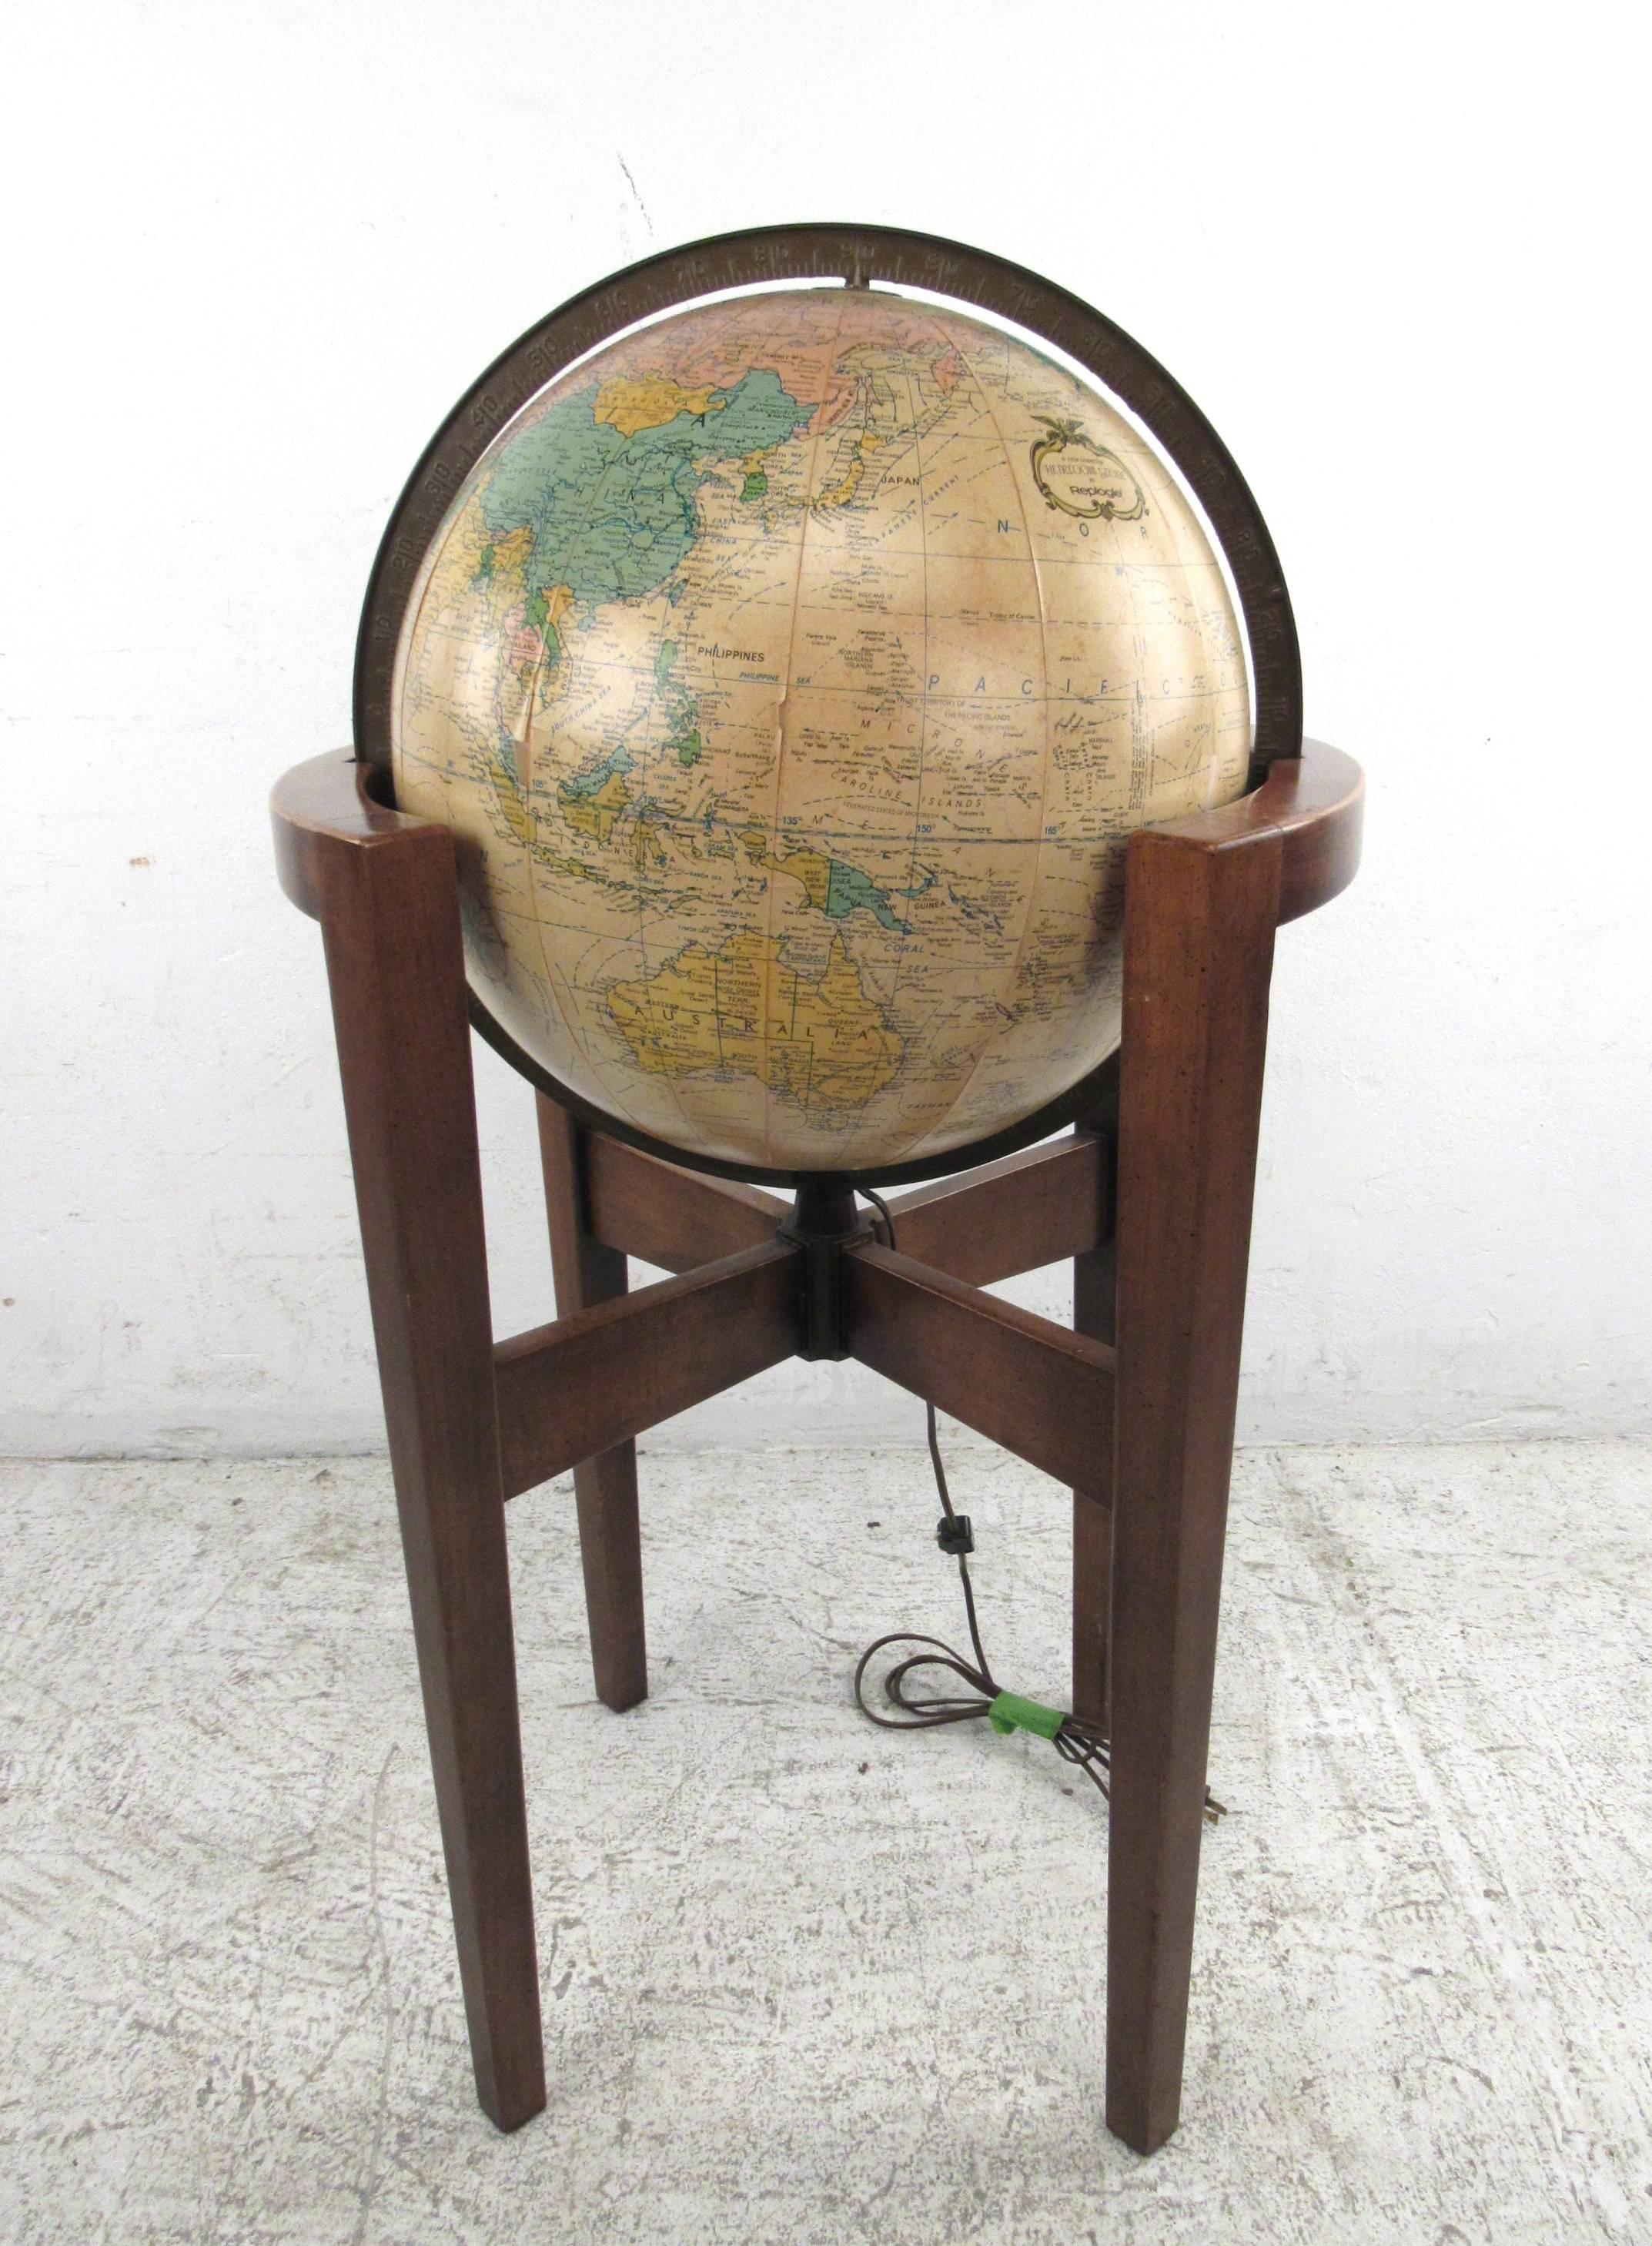 This illuminating globe by Replogle features a unique antique style 16 inch globe set in a Mid-Century style tapered leg stand. Freely spins on it's axis and makes a unique vintage addition to any setting, great for study or office! Please confirm